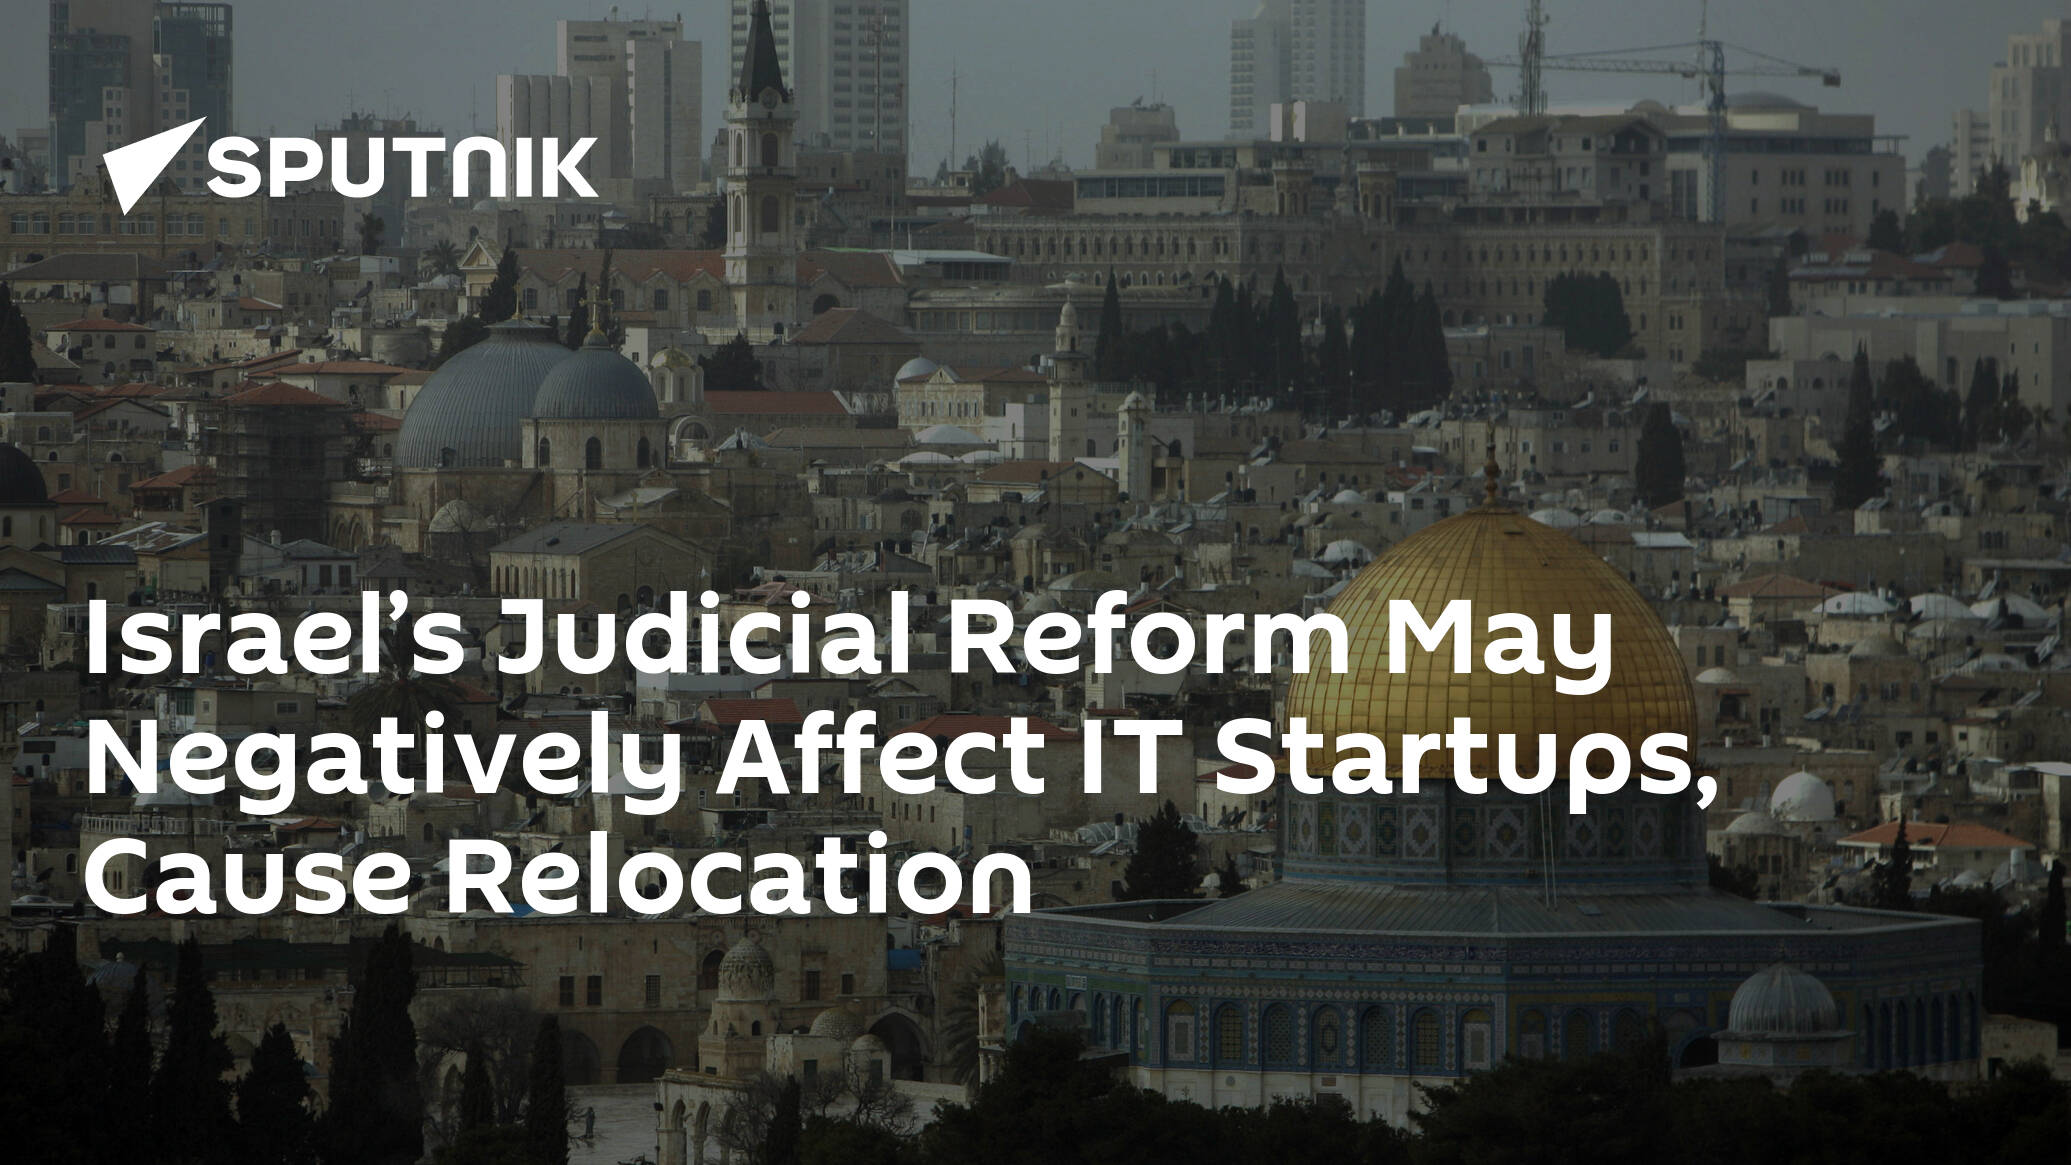 Israel’s Judicial Reform May Negatively Affect IT Startups, Cause Relocation